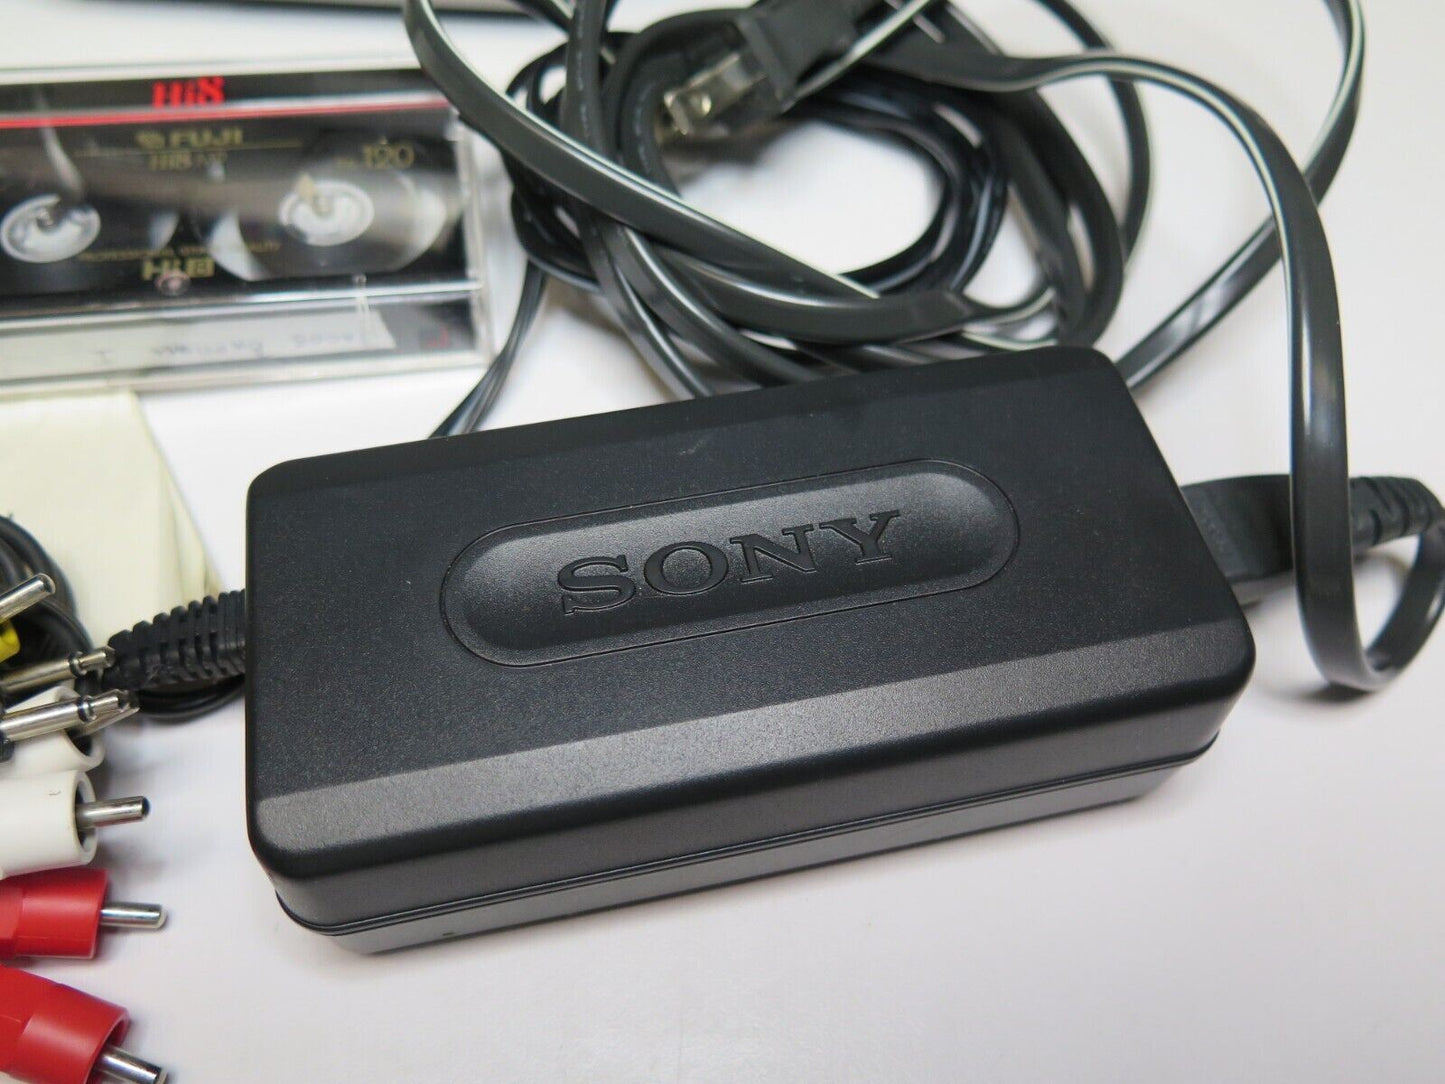 Sony CCD-TRV66 HI8 8mm Video8 Stereo Camera Camcorder VCR Player Video Transfer